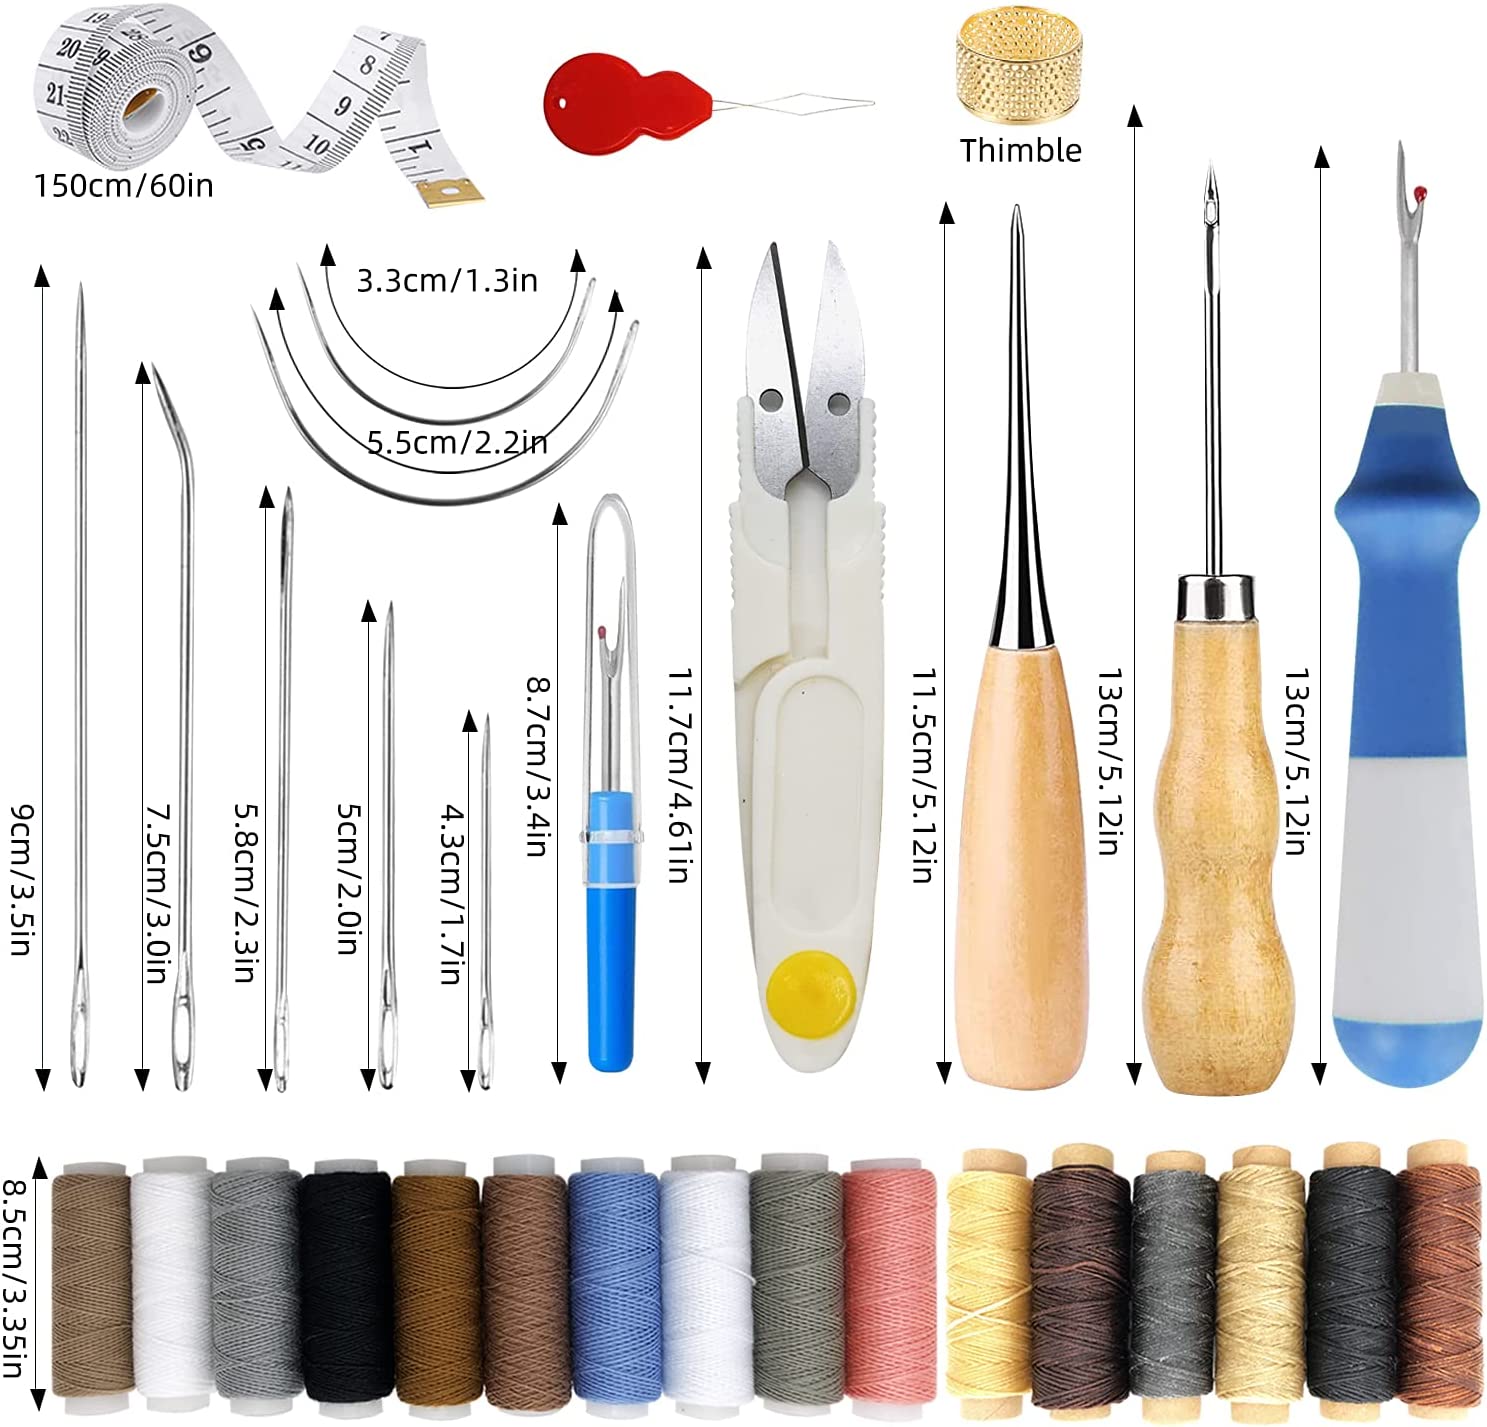 PLANTIONAL 34 Pcs Basic Leather Sewing Kit: Upholstery Thread Cord, Leather Waxed Thread with Sewing Awl, Seam Ripper, Tape Measure Large-Eye